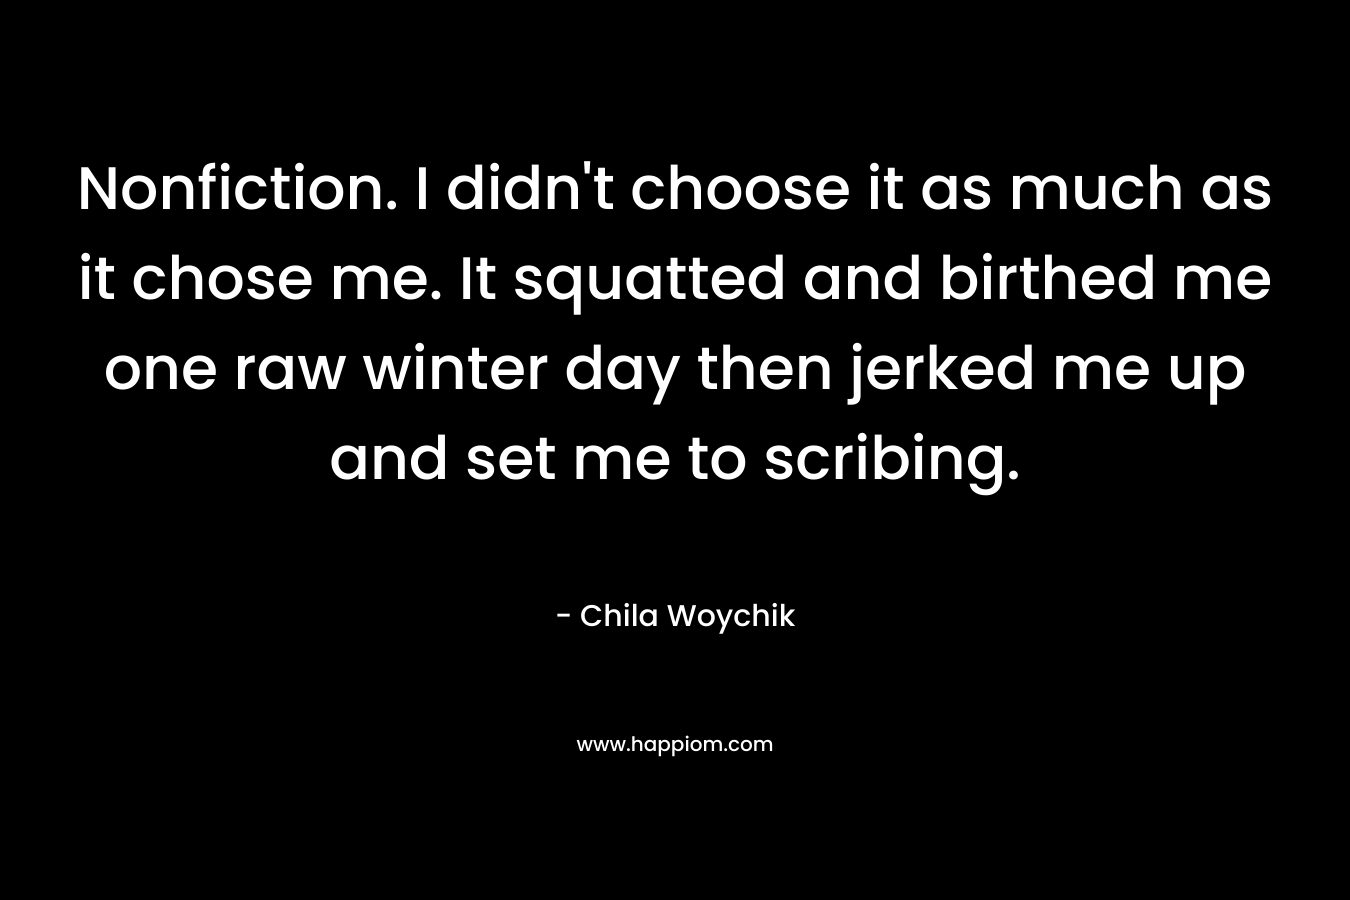 Nonfiction. I didn't choose it as much as it chose me. It squatted and birthed me one raw winter day then jerked me up and set me to scribing.